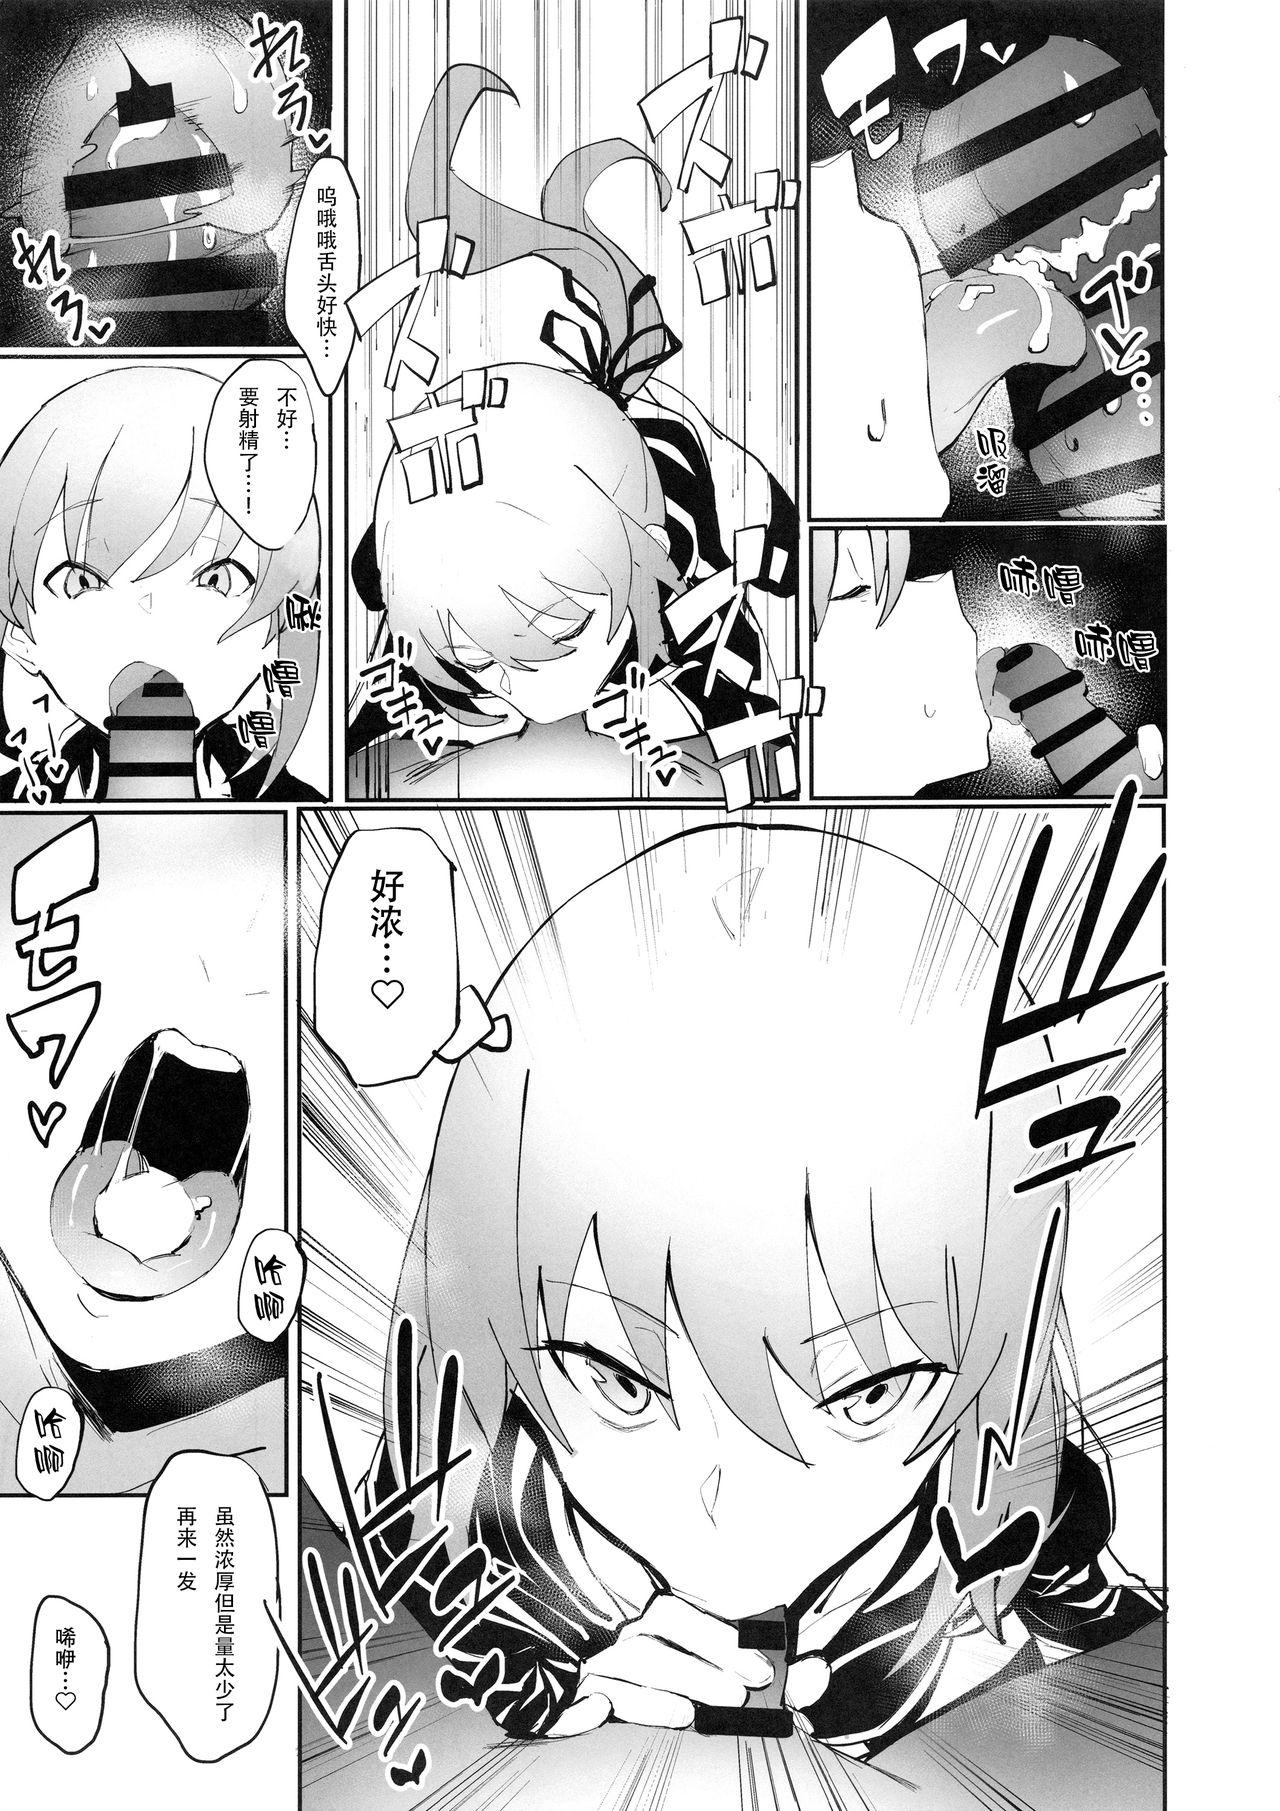 Women Sucking Dick Saber Alter to Maryoku Kyoukyuu | 和saber alter的魔力供给♡ - Fate grand order Making Love Porn - Page 8